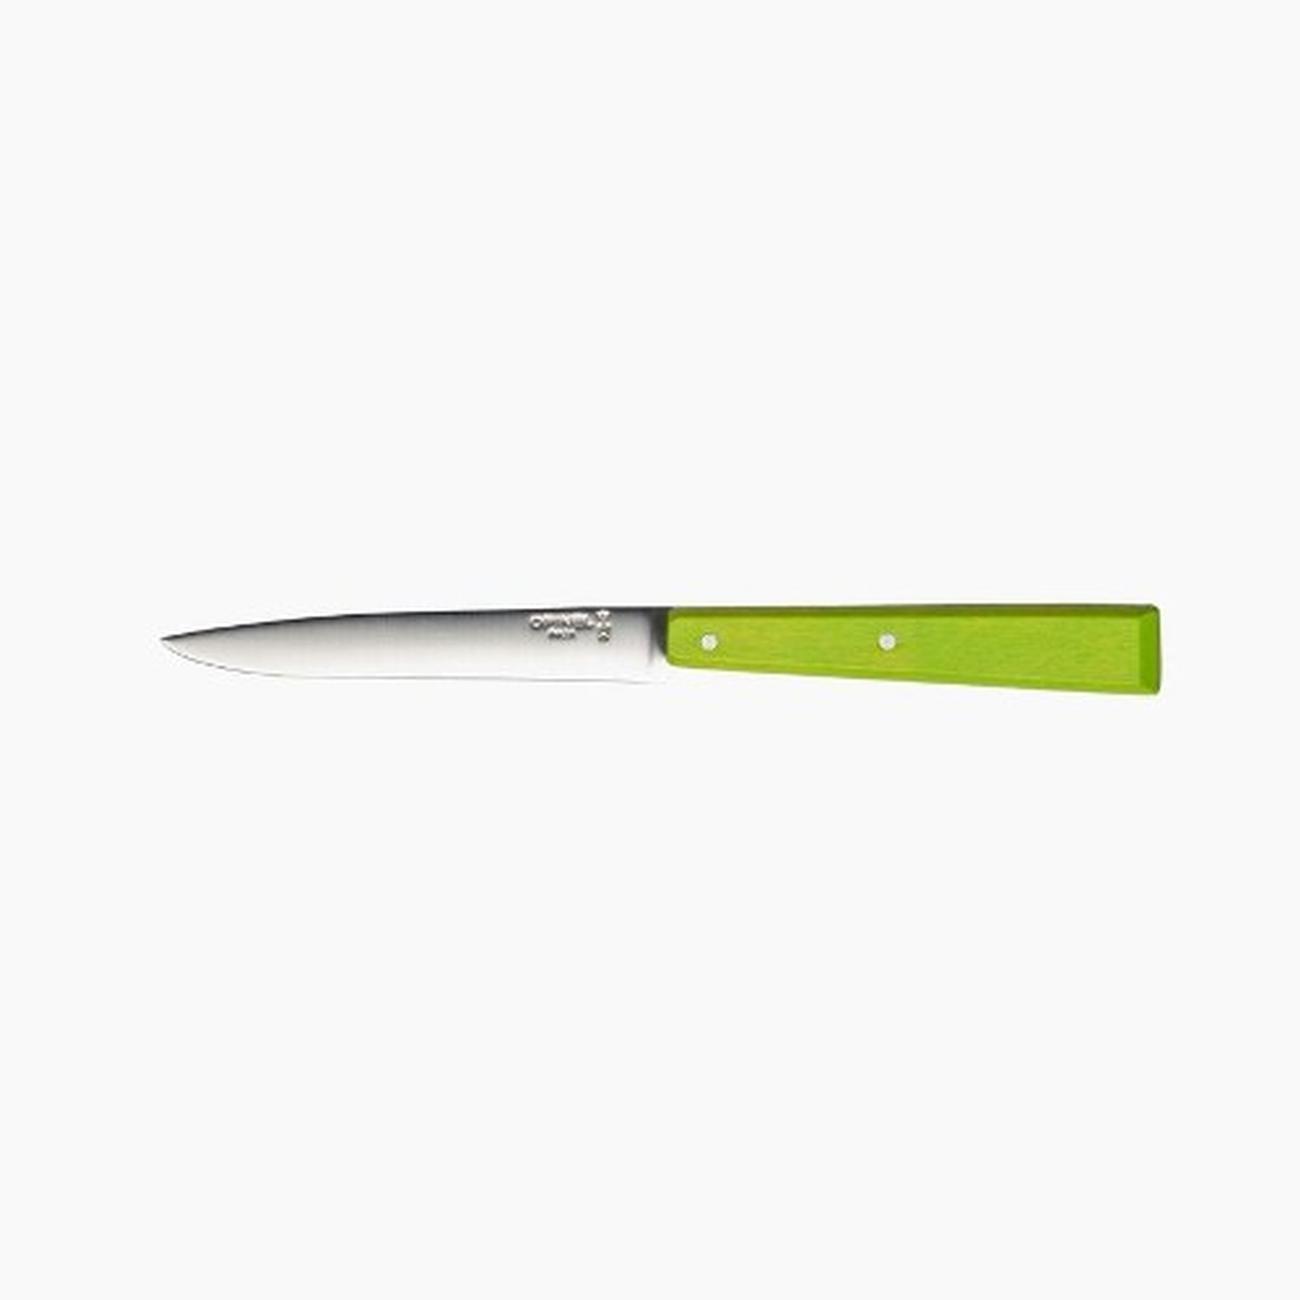 https://www.thekitchenwhisk.ie/contentfiles/productImages/Large/Opinel-Bon-Apetit-Table-Knife-N125-Apple-Green.jpg